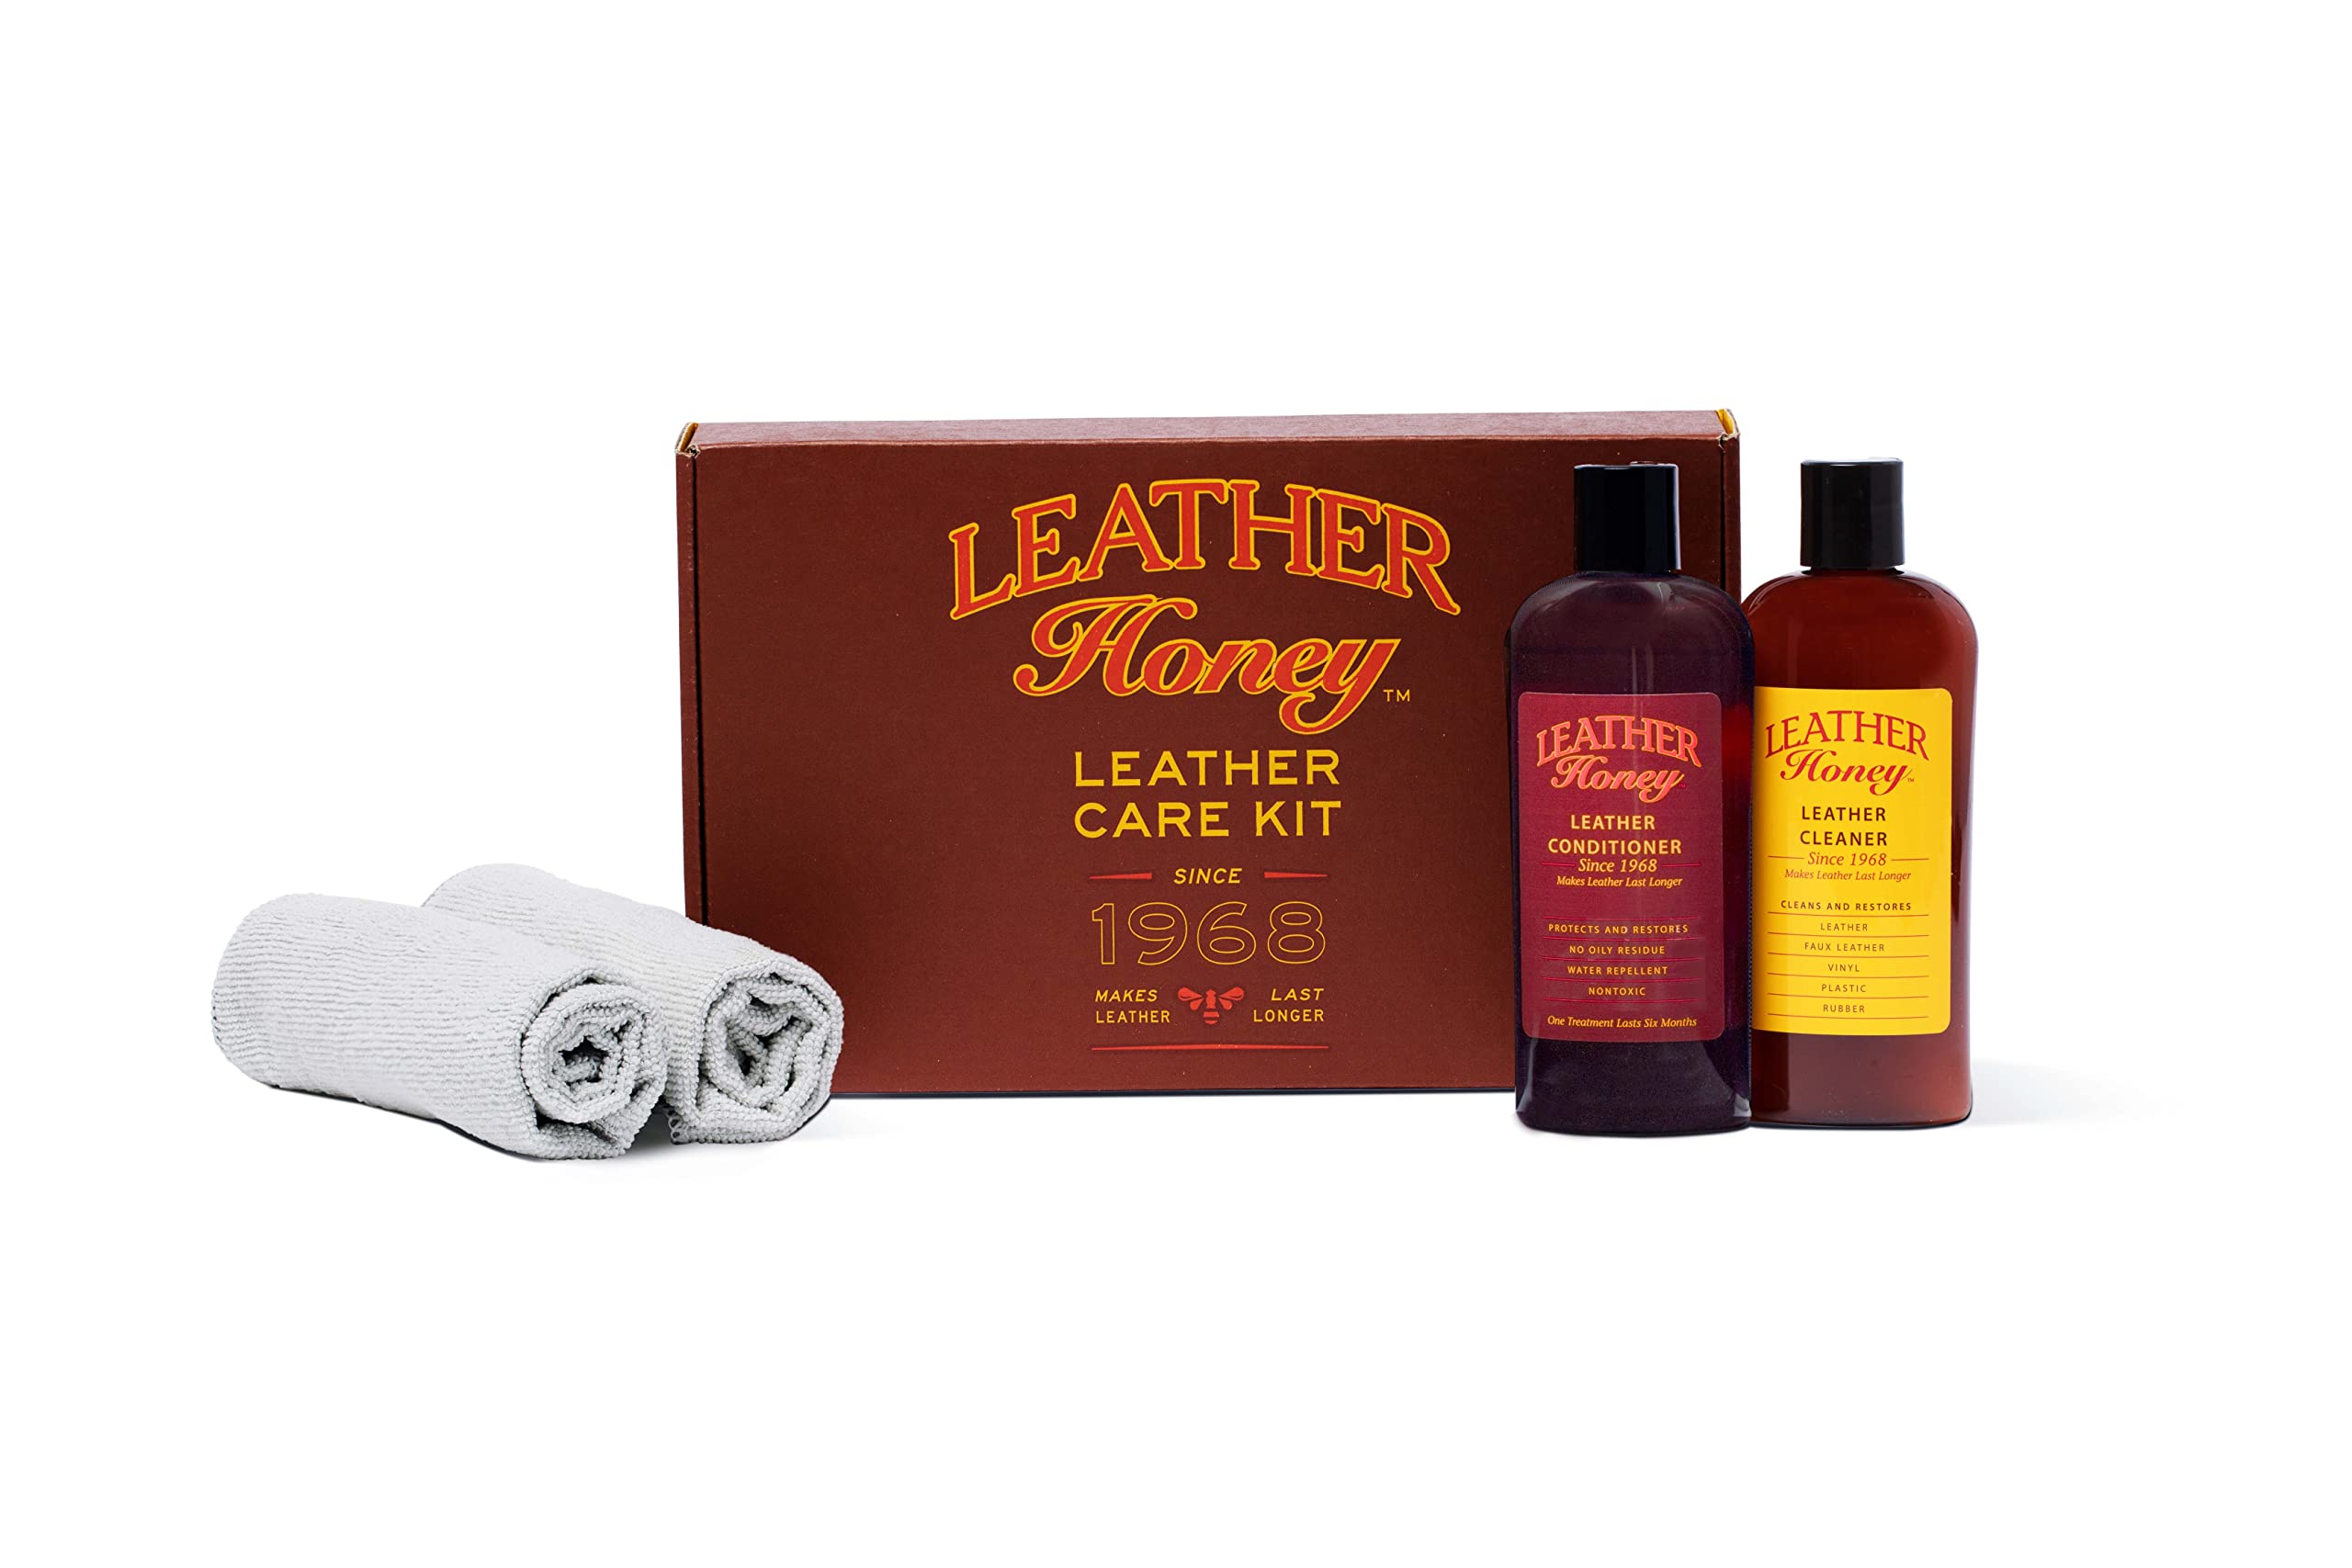 Apple Brand Leather Cleaner & Conditioner Kit - for Use On Leather Purses,  Handbags, Shoes, Boots & Accessories - Safe On Colored and Natural Leather